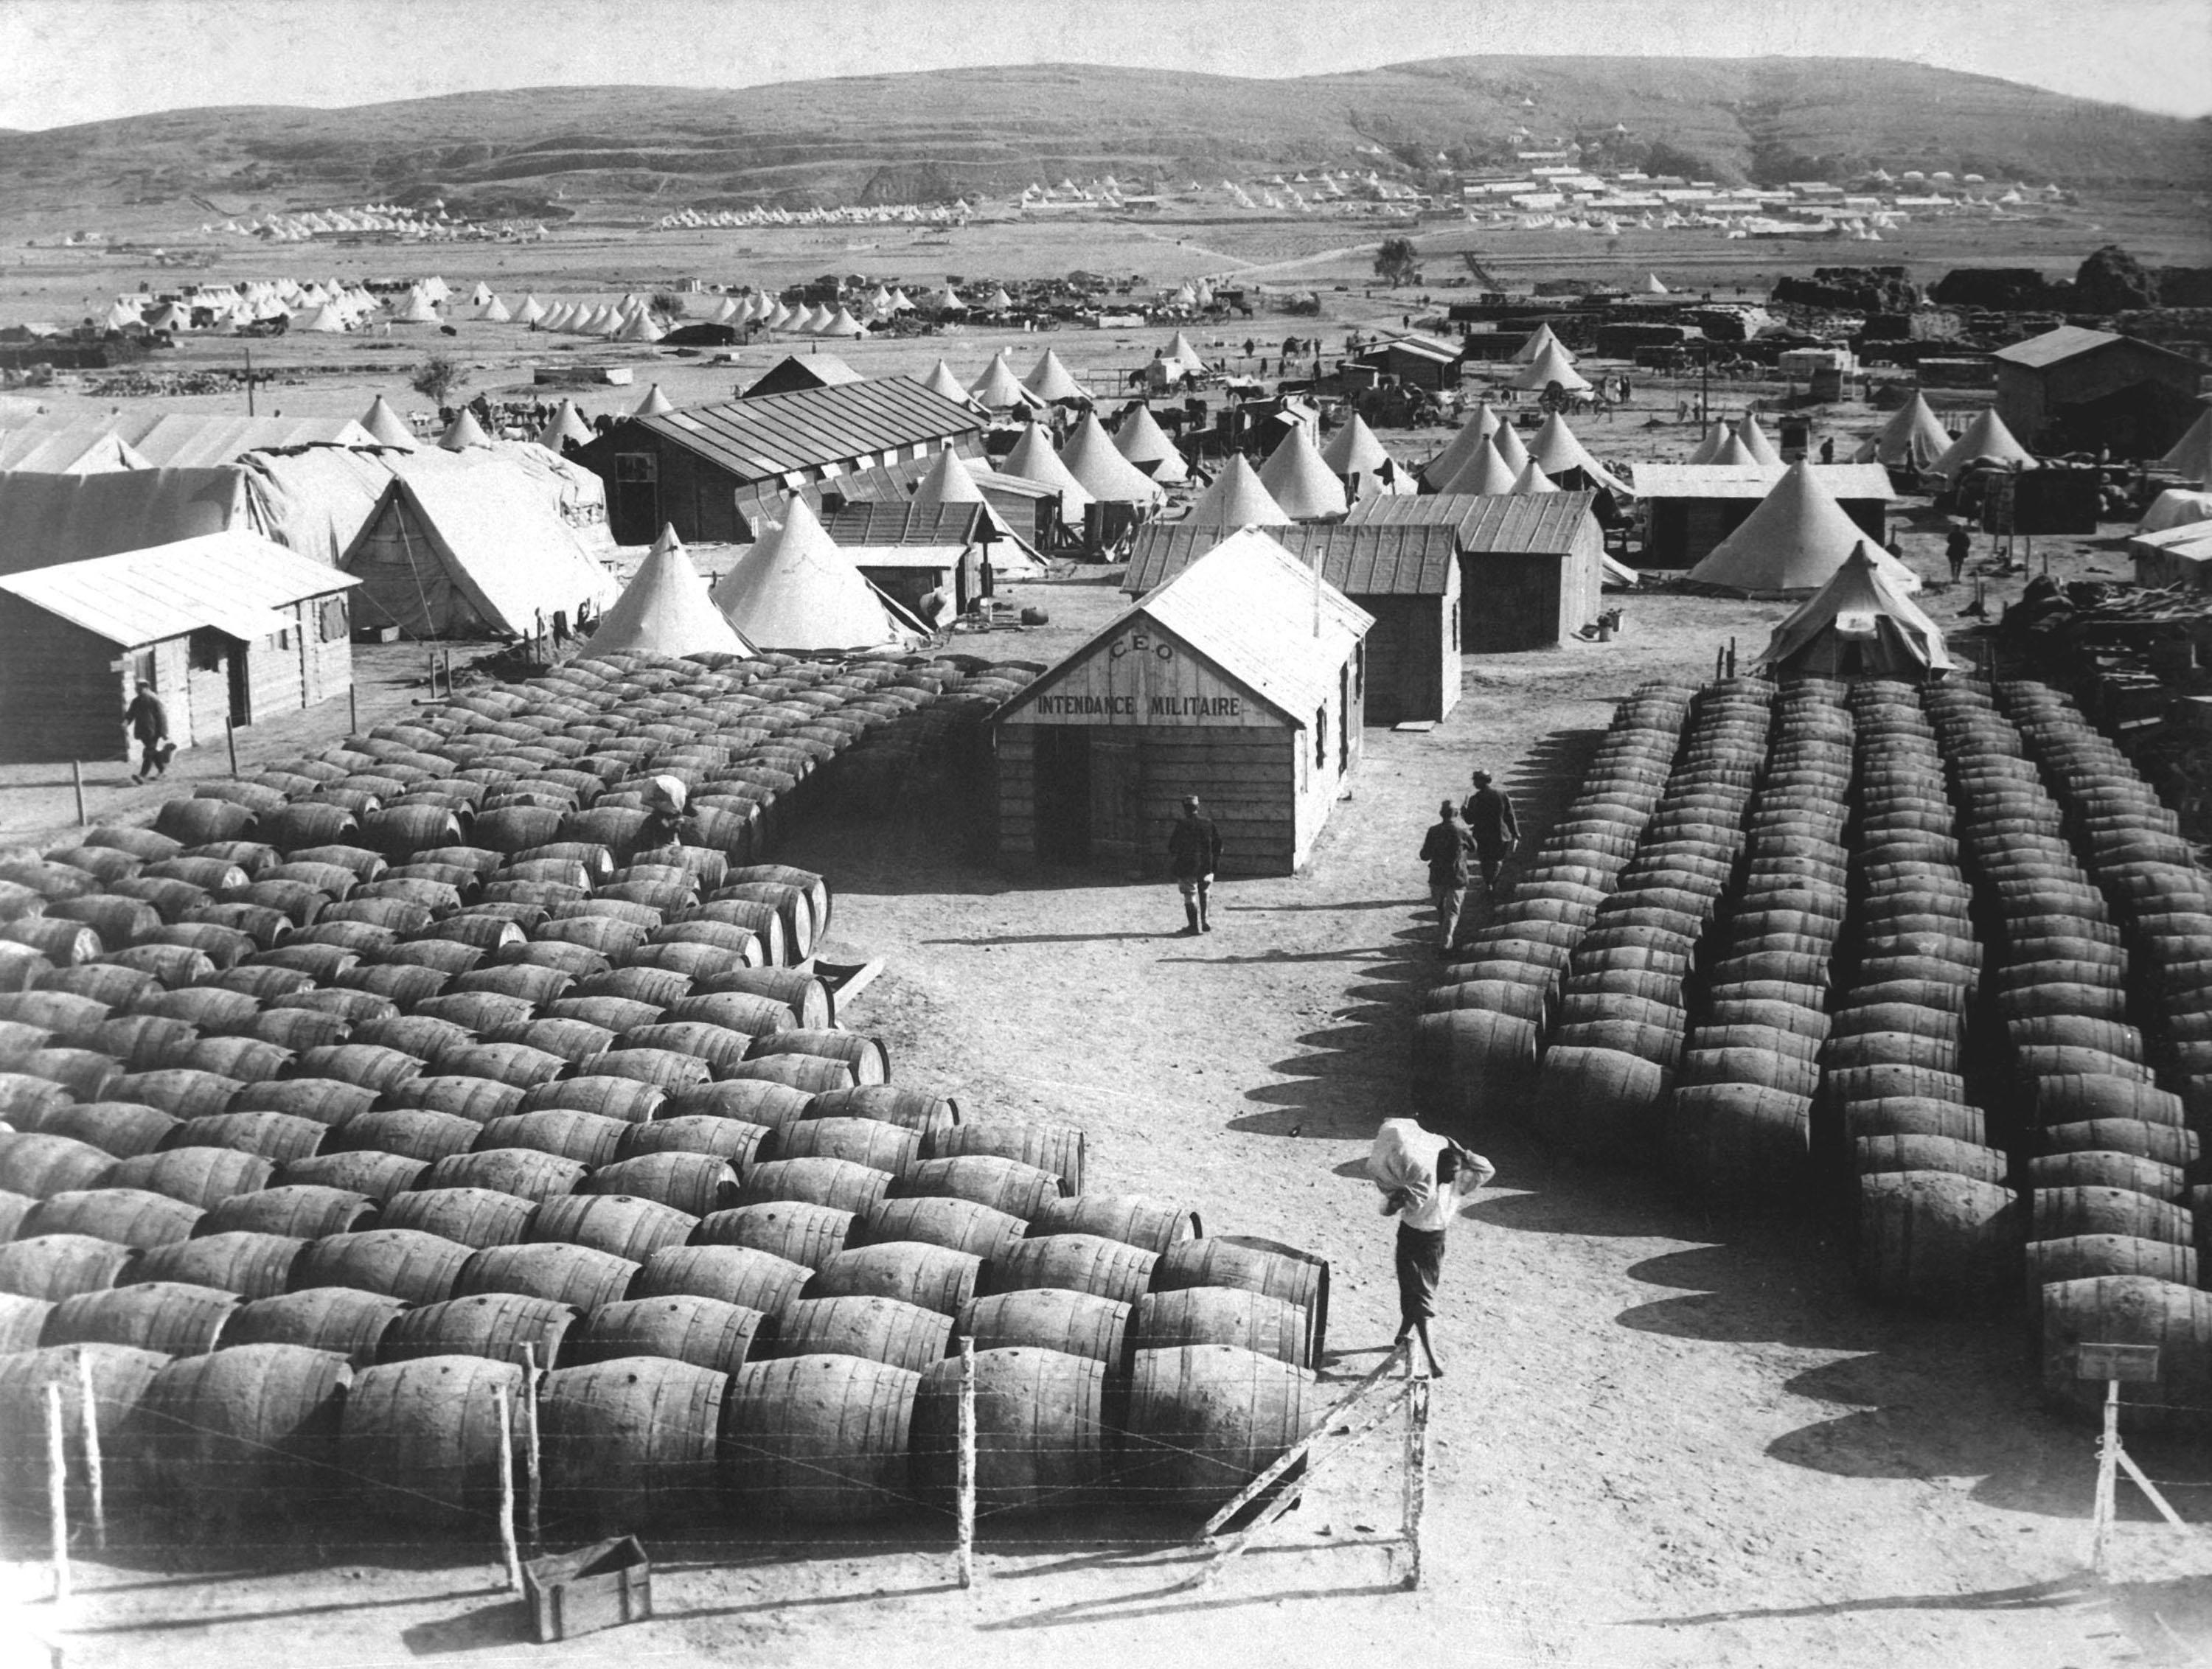 Hundreds of barrels on unpaved, grassless ground in a barren, open space with small, cone-shaped edifices nearby